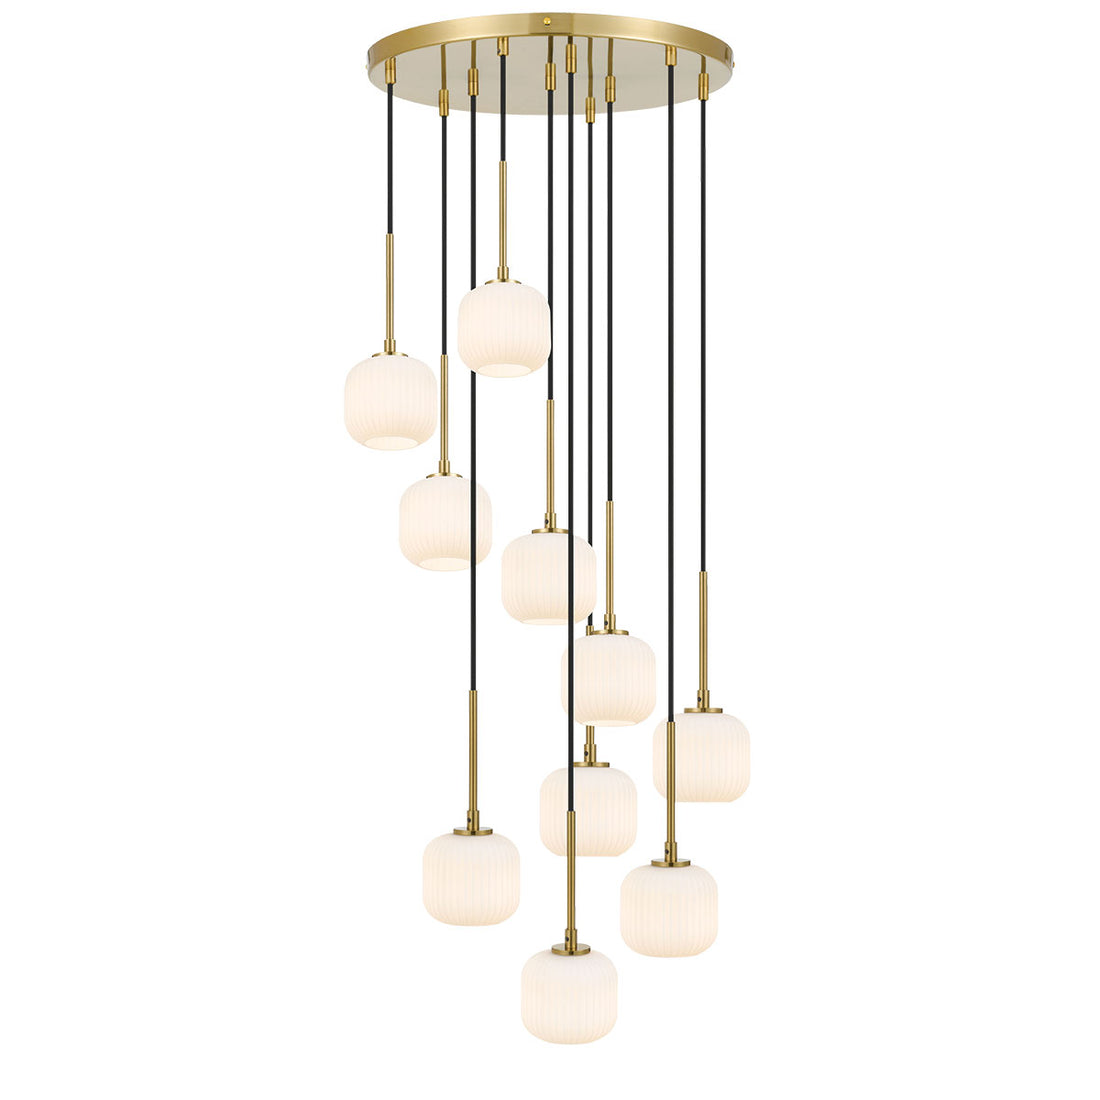 Bobo 10 Light Antique Gold with Opal Glass Pendant